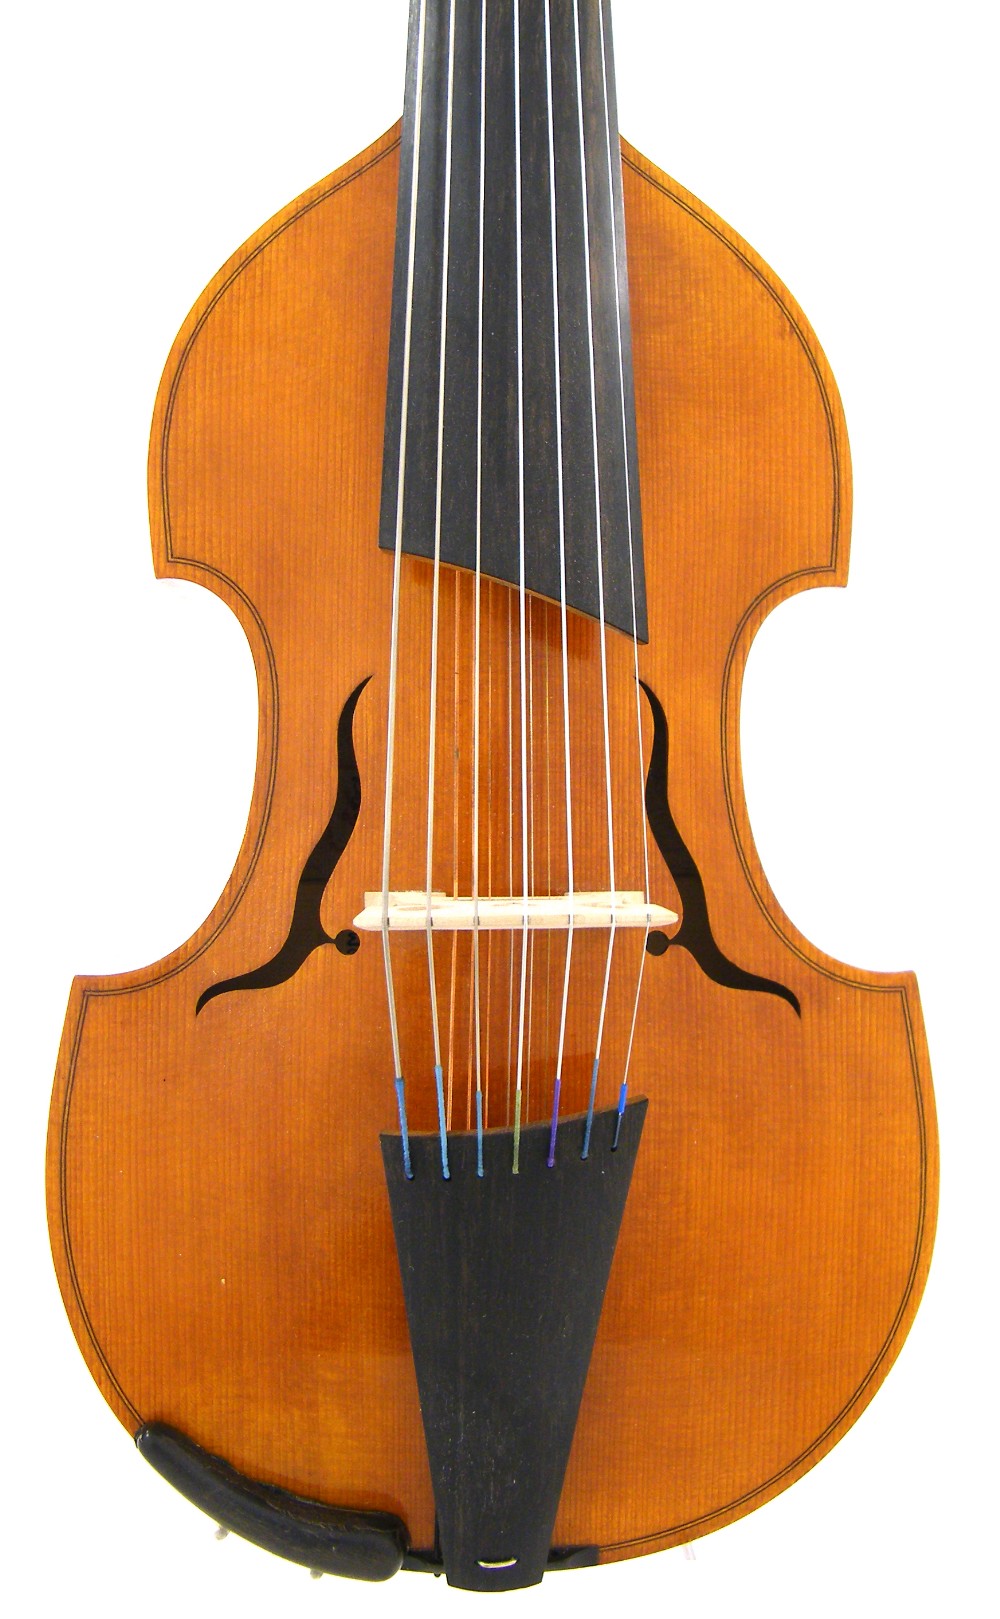 Contemporary viola d`amore labelled Viola d`amore Testa BJ Violin Workshop, with two bows and within